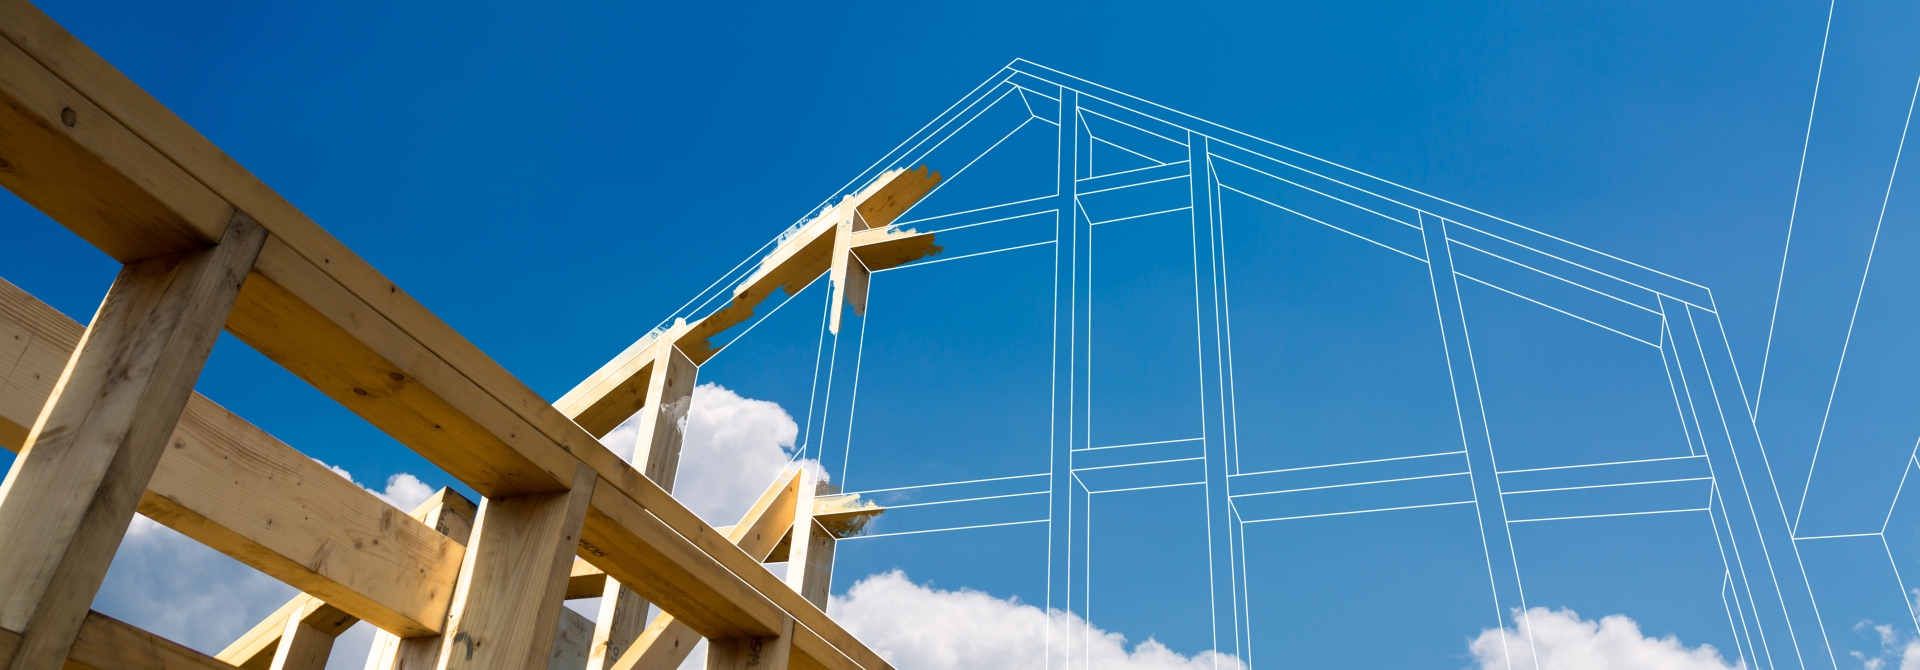 Frame of a house with outline of blueprints against a blue sky